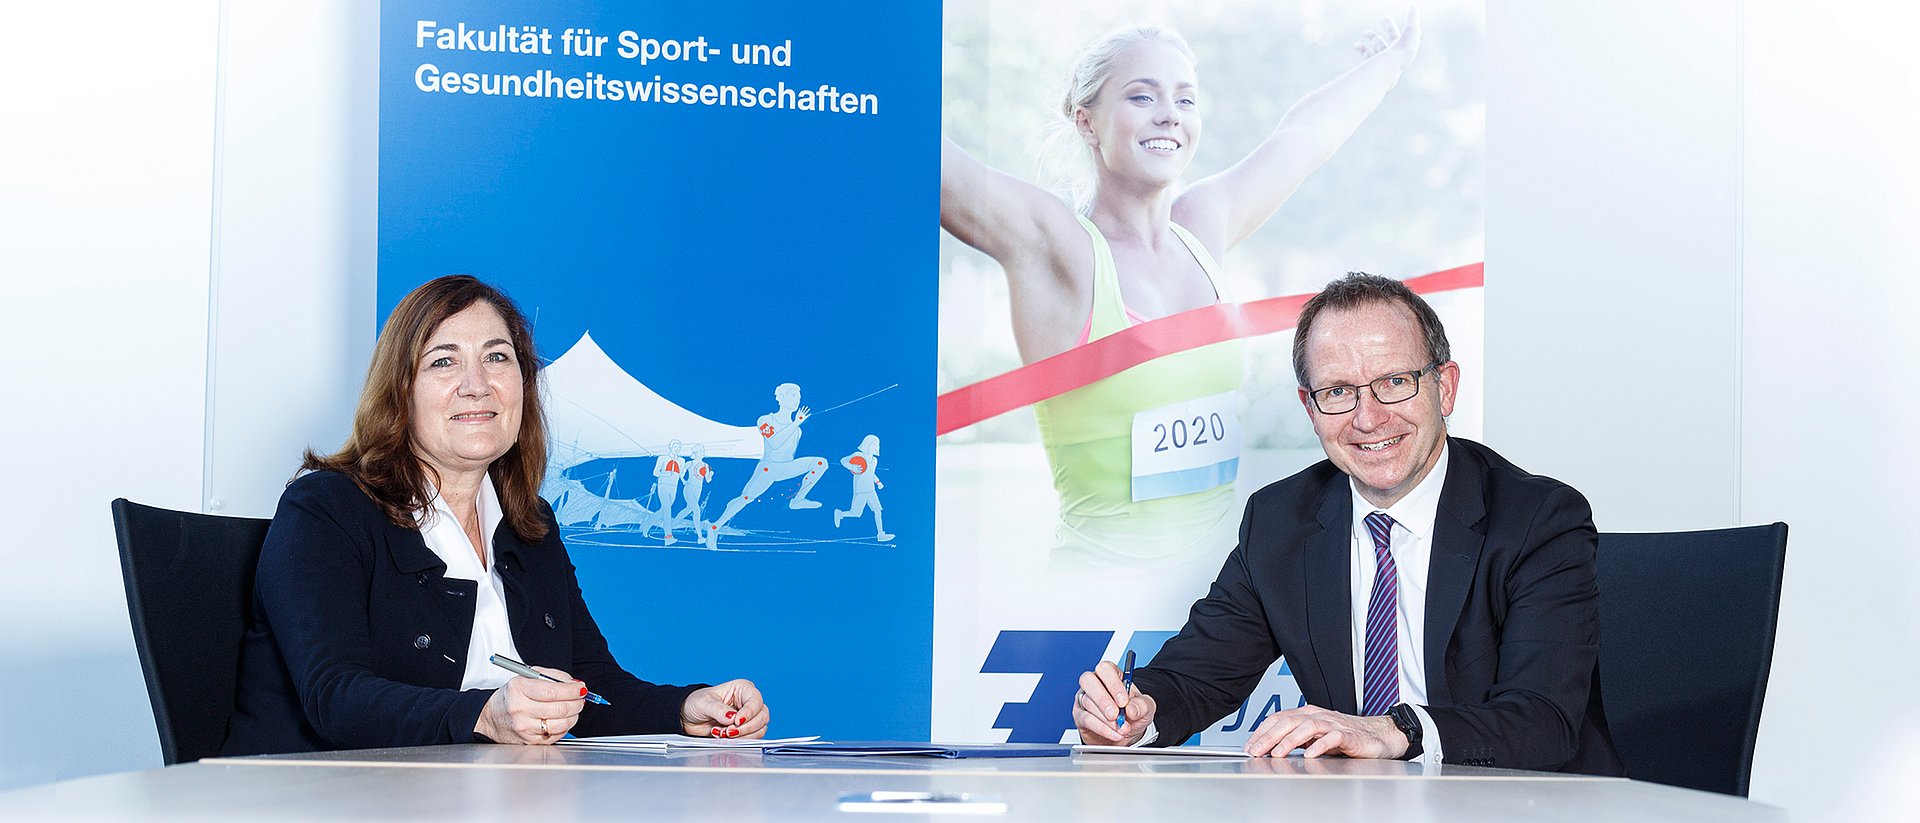 Prof. Renate Oberhoffer-Fritz (Dean of the Department of Sport and Health Sciences at TUM, left) and Jörg Ammon (President of BLSV).